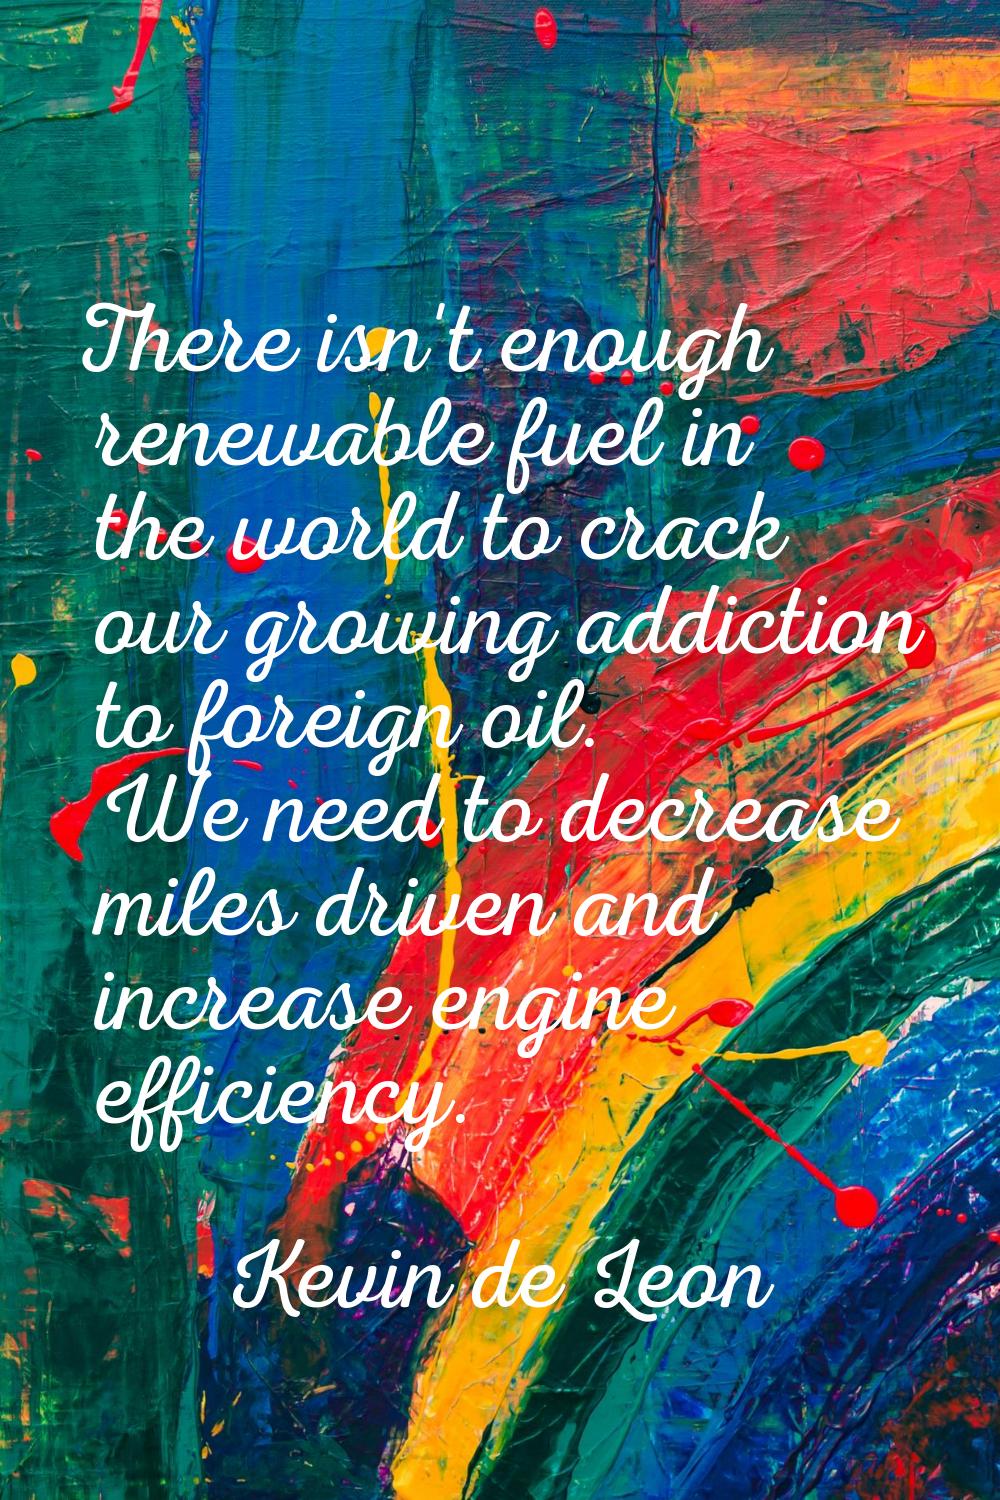 There isn't enough renewable fuel in the world to crack our growing addiction to foreign oil. We ne